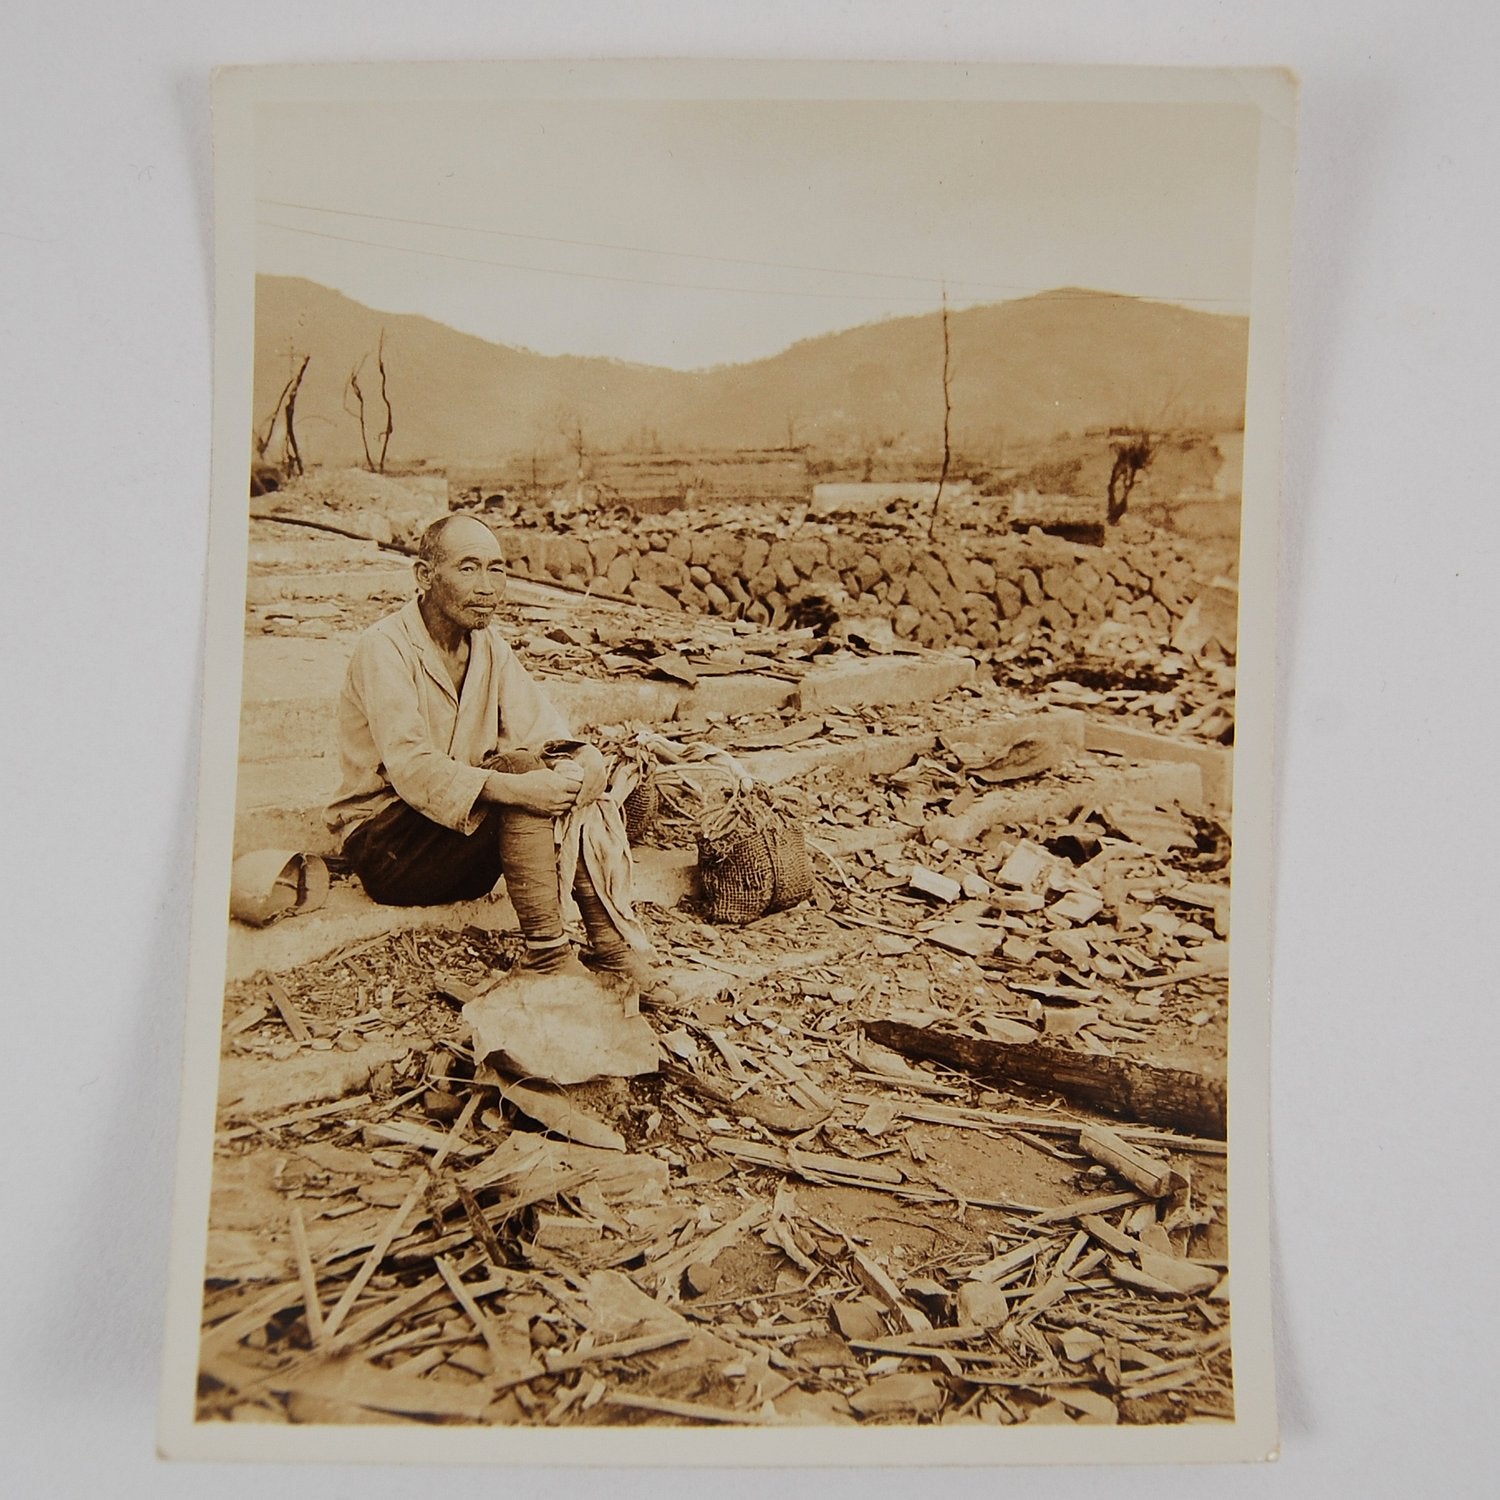 Original Photos of the Pacific Theatre during the Second World War, including Nagasaki